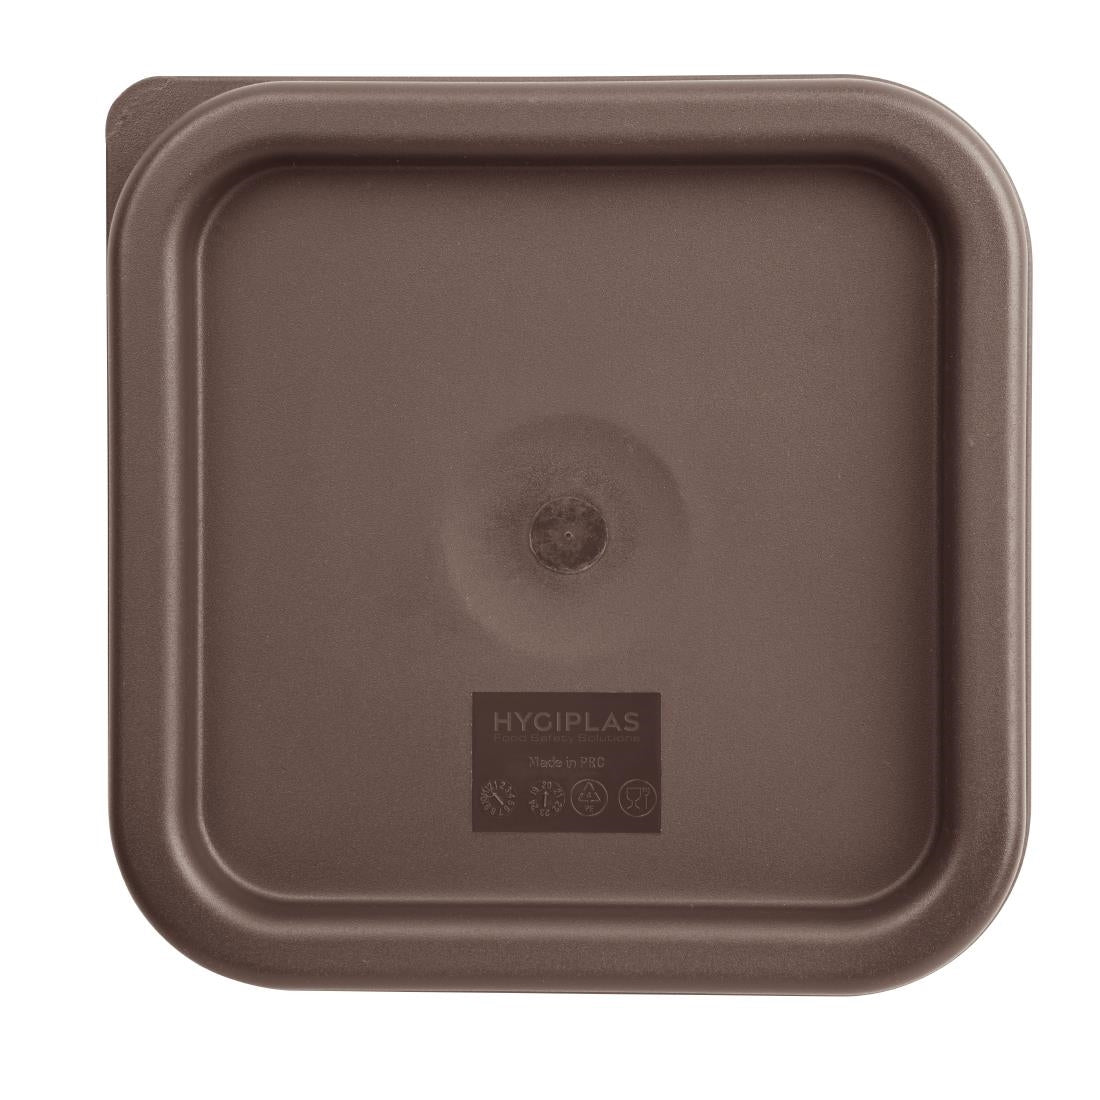 FX140 Hygiplas Square Food Storage Container Lid Brown Small